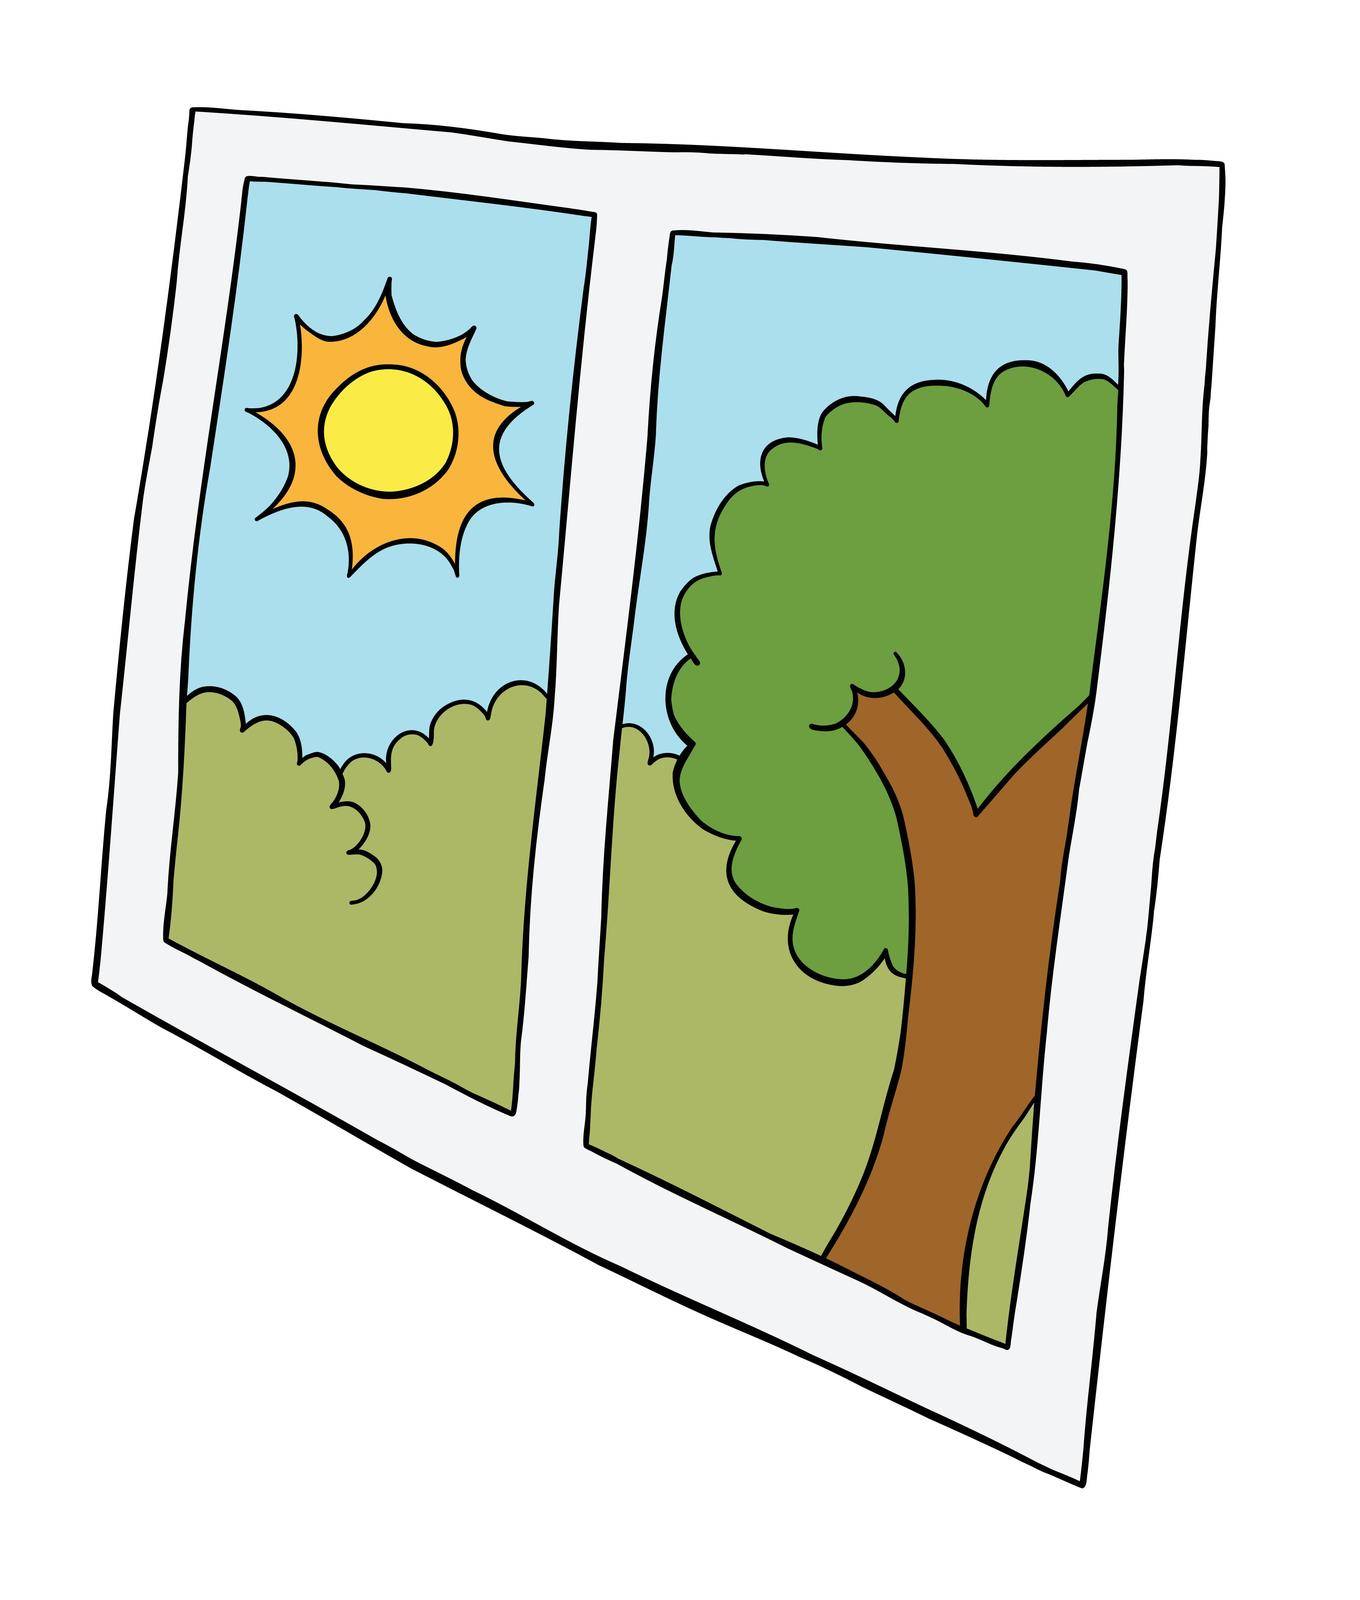 Cartoon vector illustration of window and day, sun and tree. Colored and black outlines.